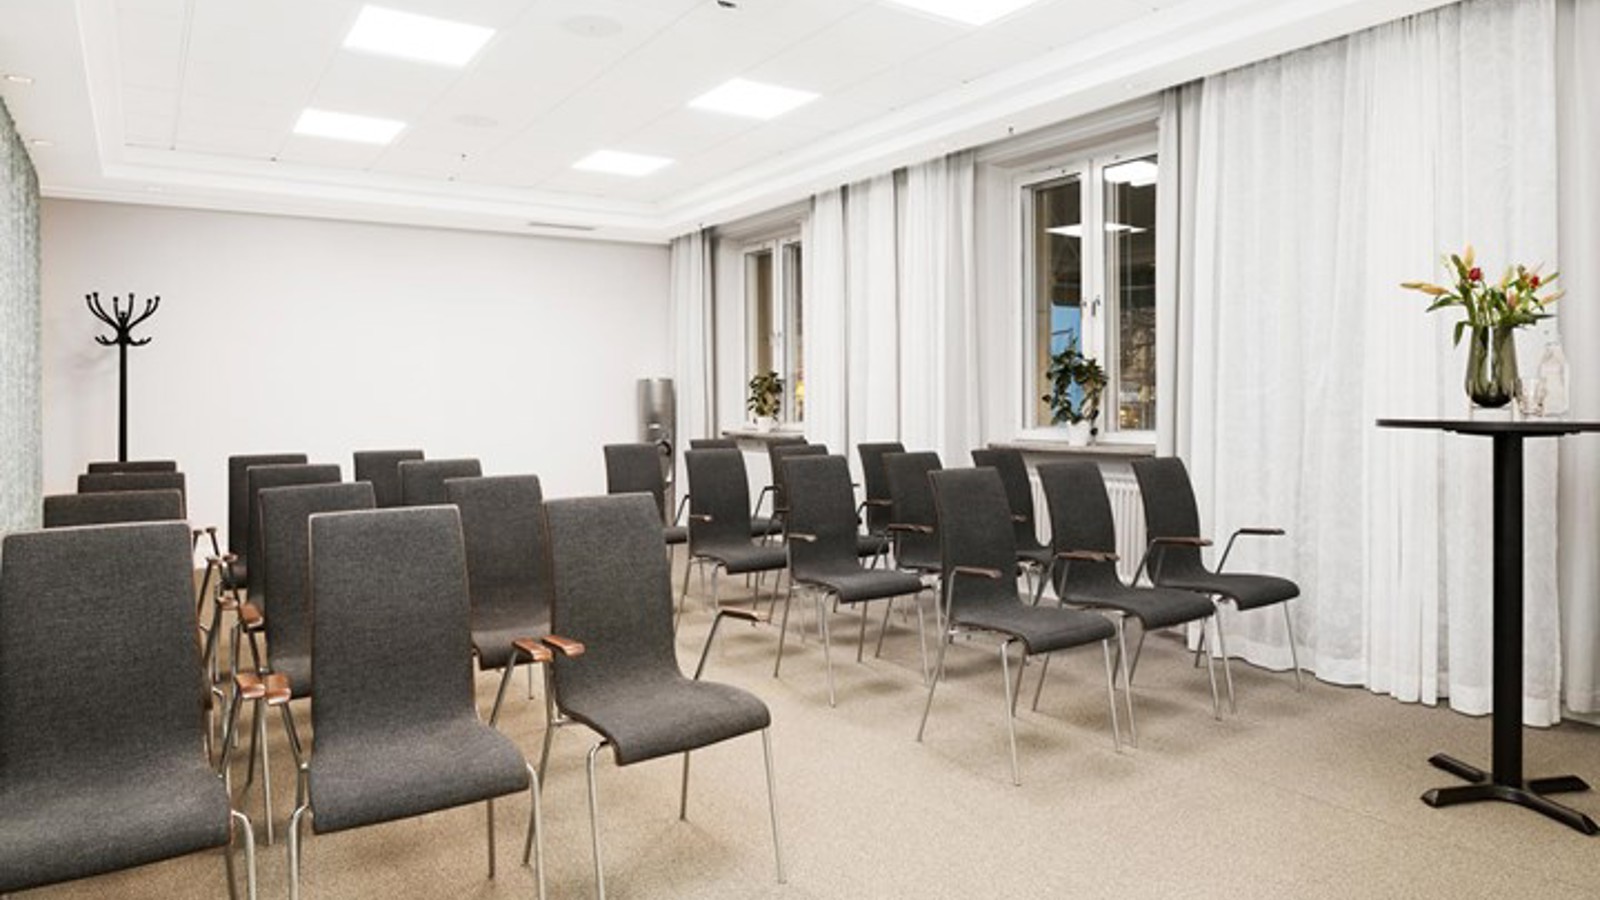 Conference room with lined up chairs